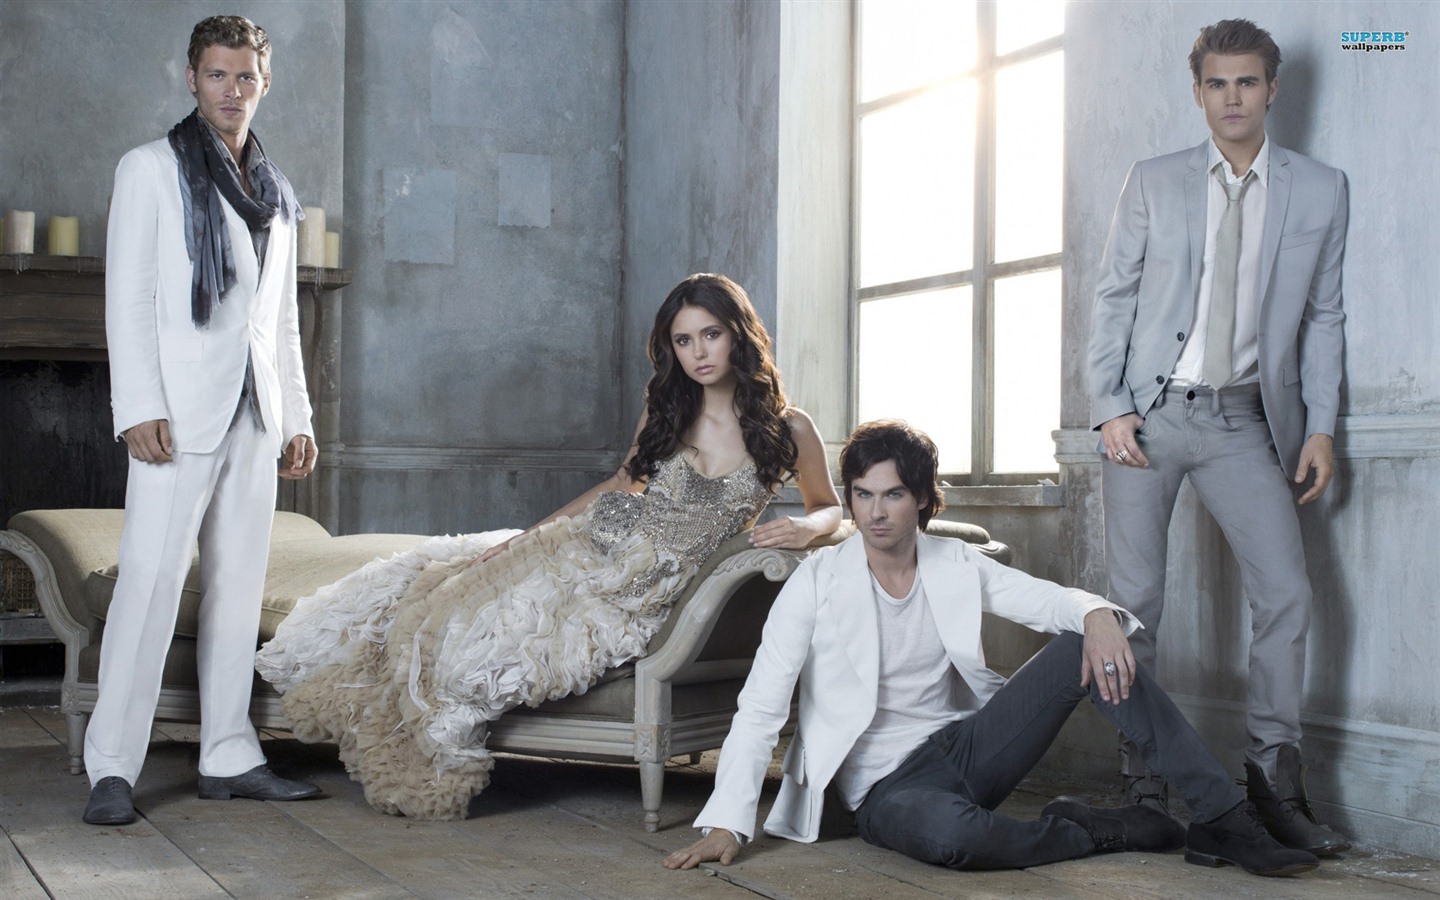 The Vampire Diaries HD Wallpapers #8 - 1440x900